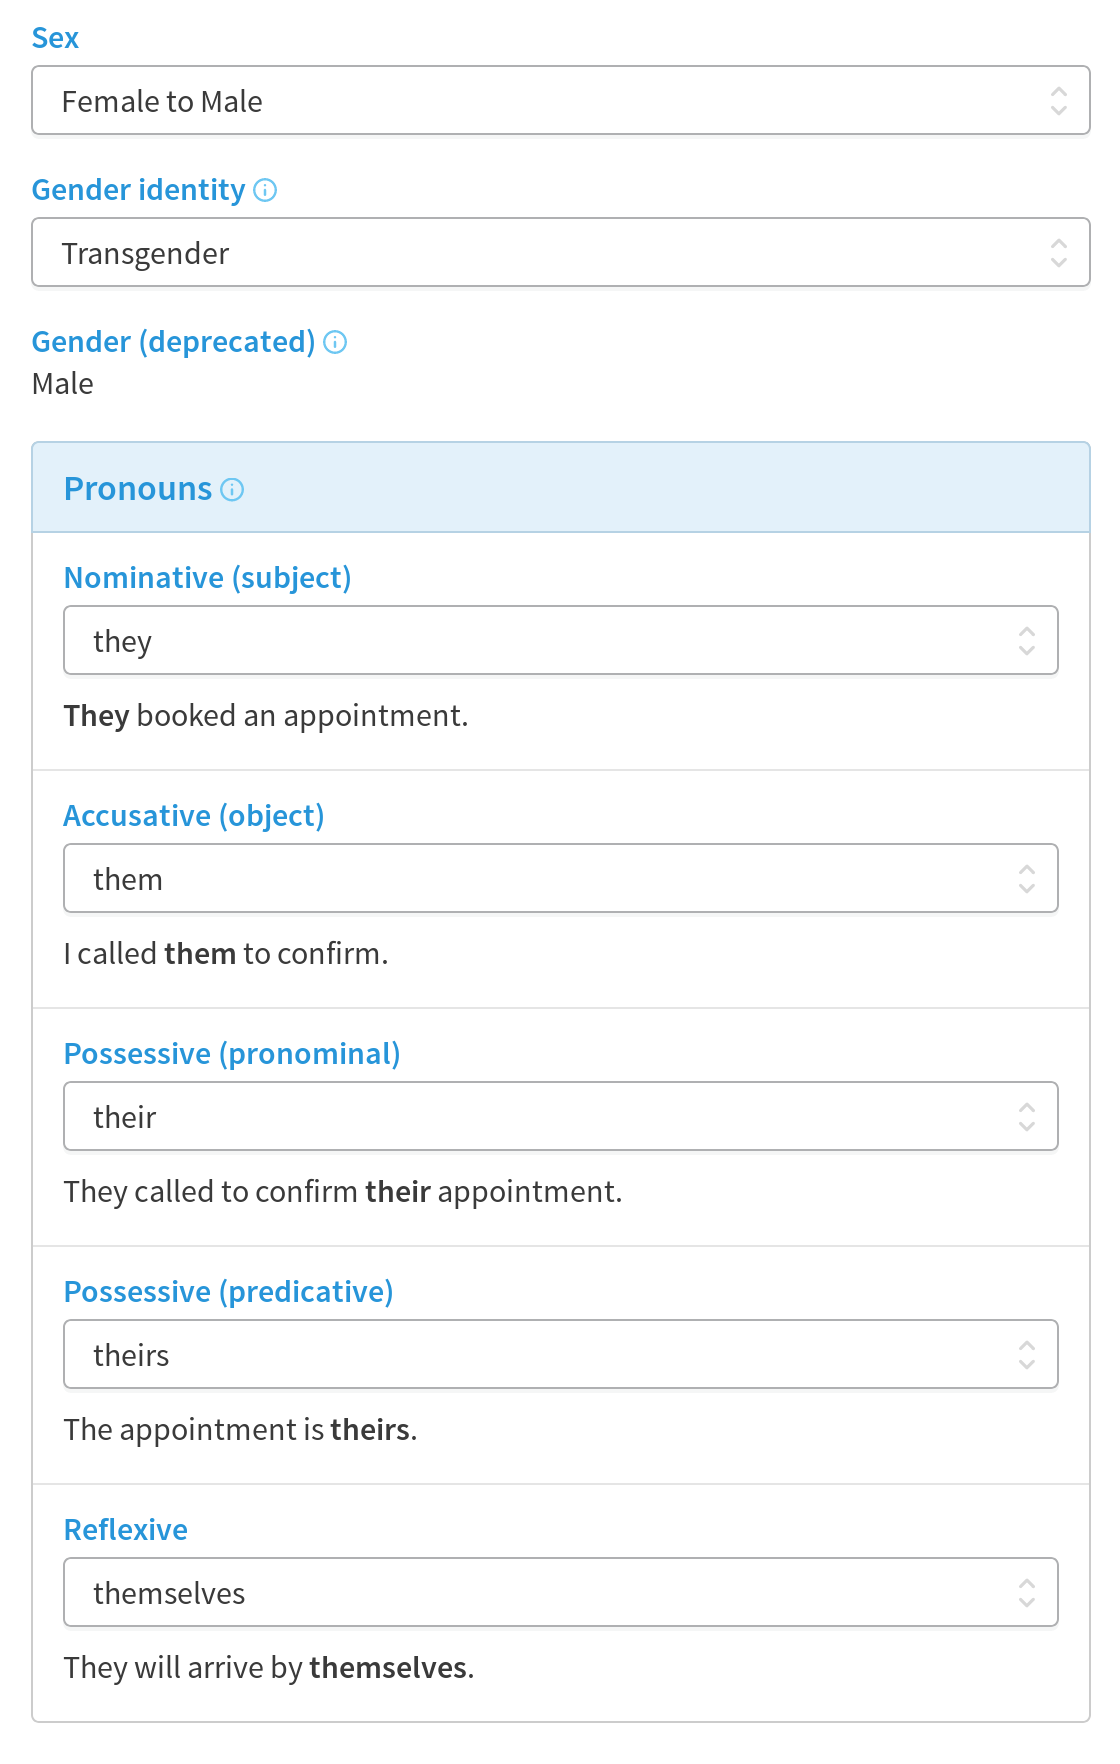 Cliniko settings for sex, gender identity and pronoun options.